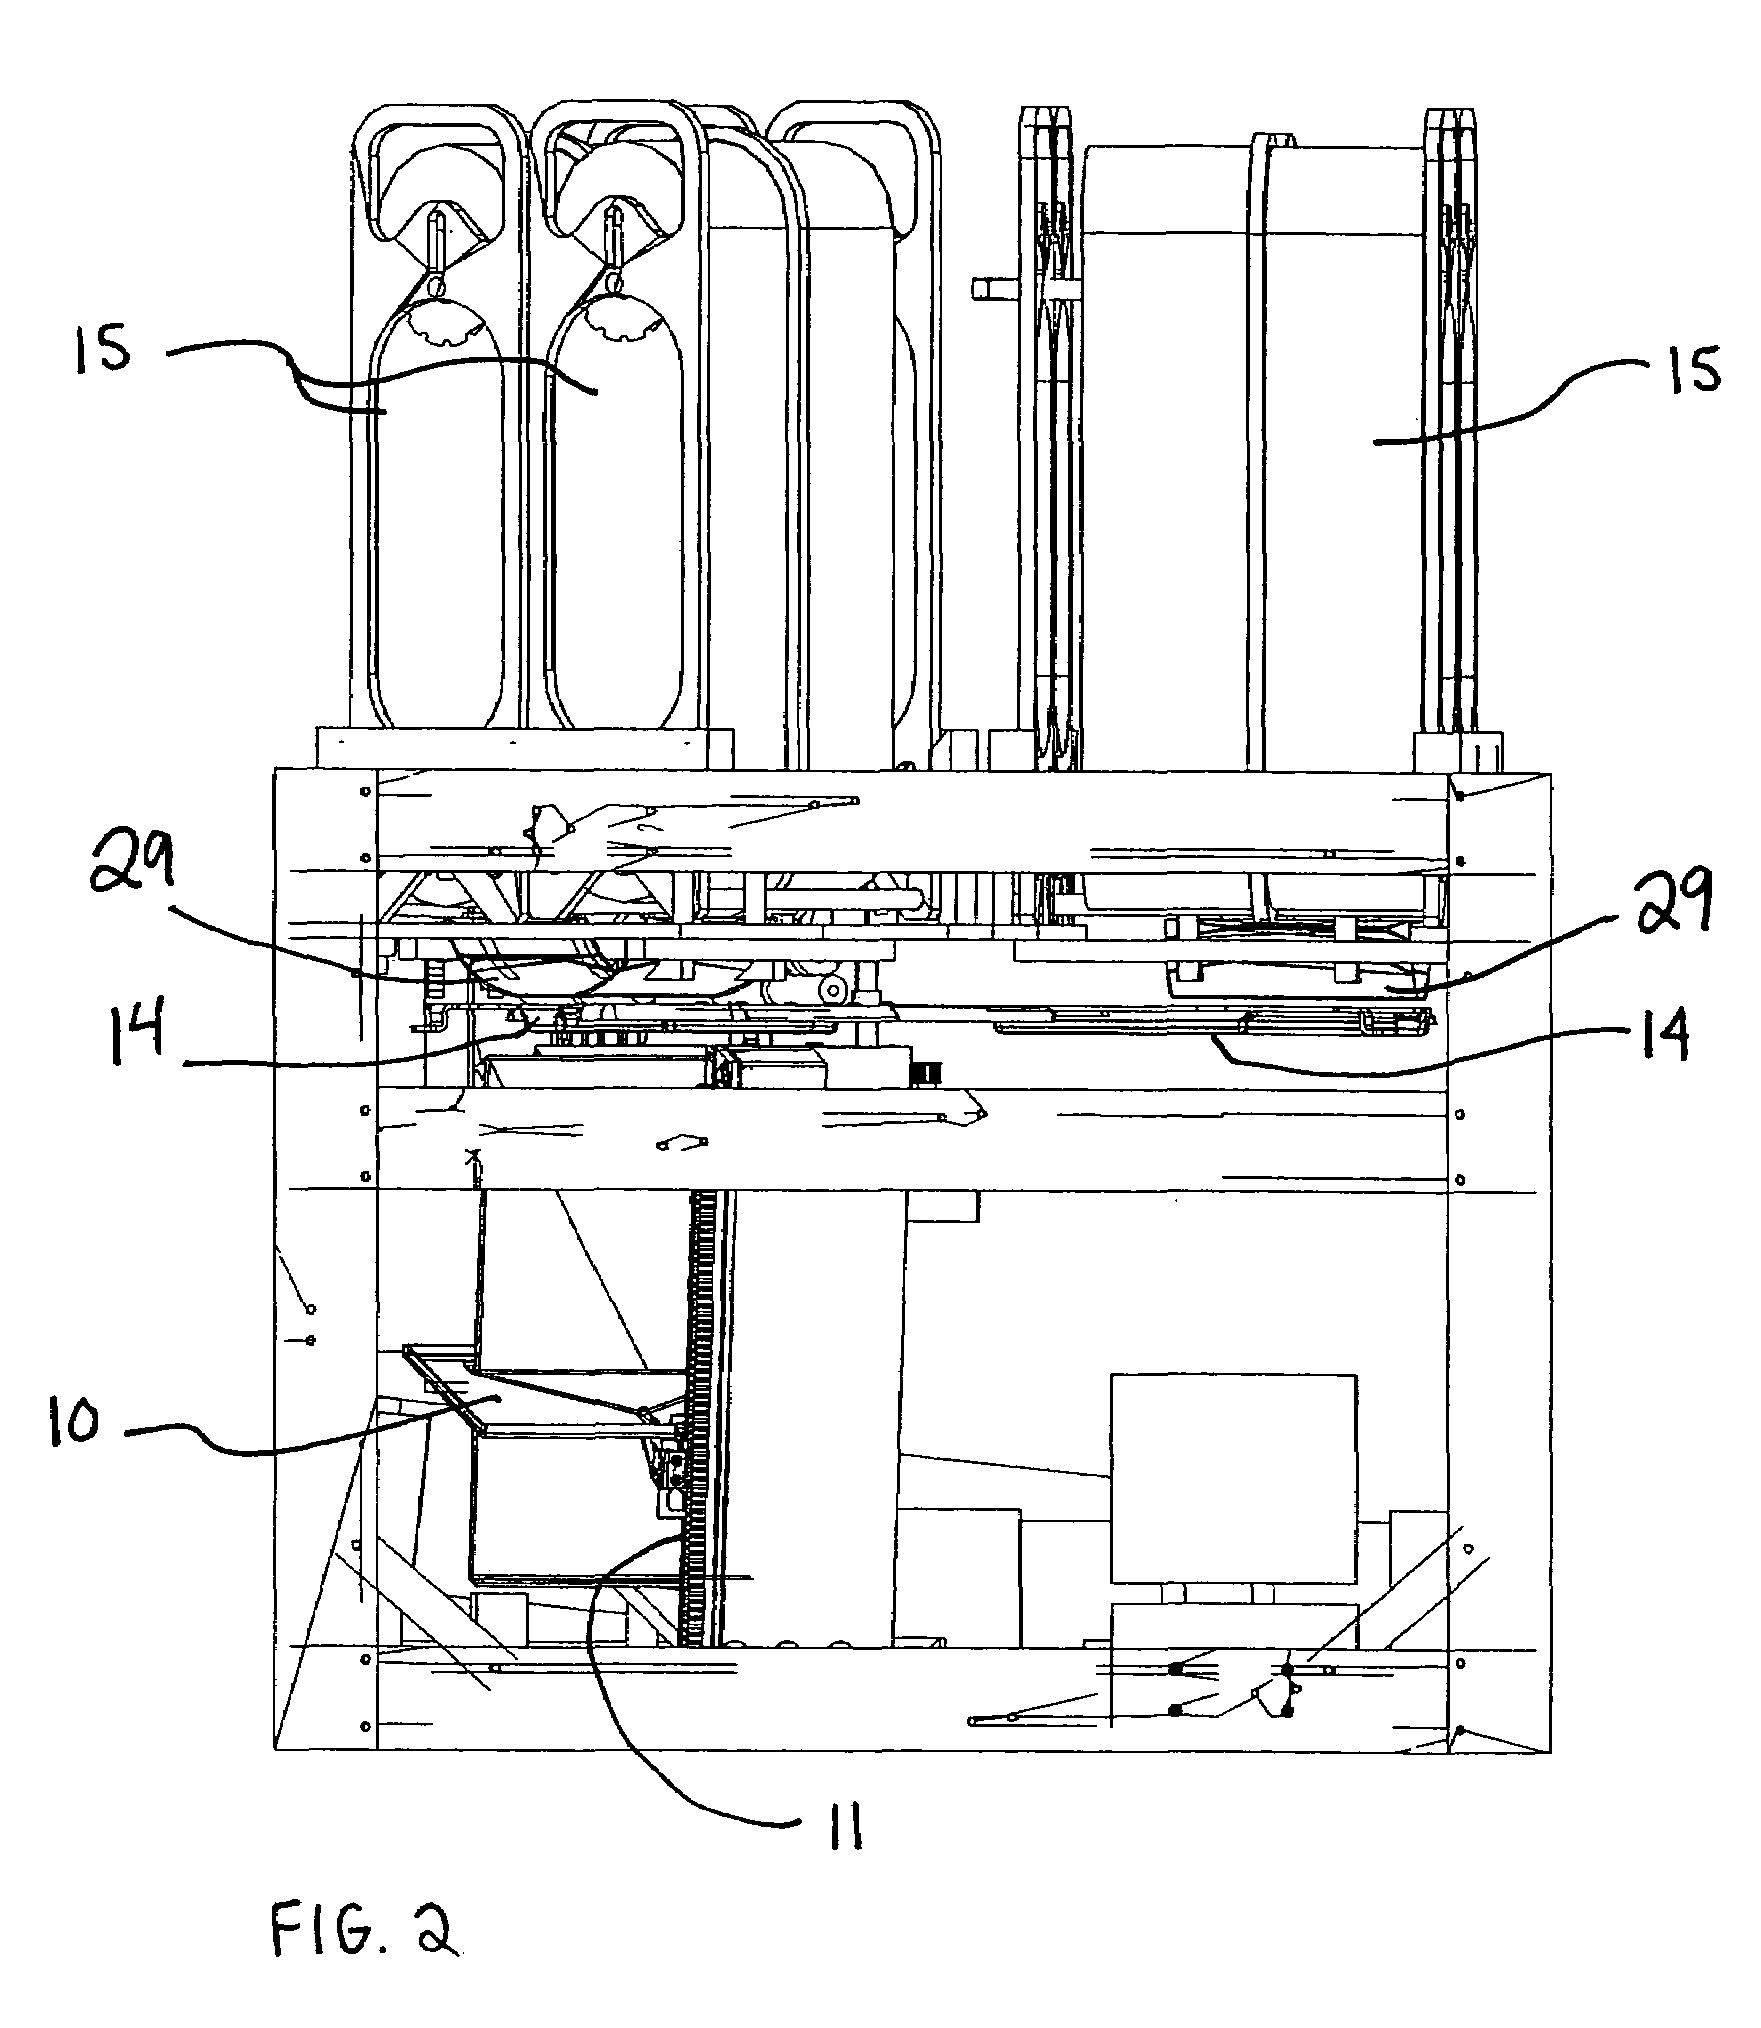 Apparatus and method for wrapping